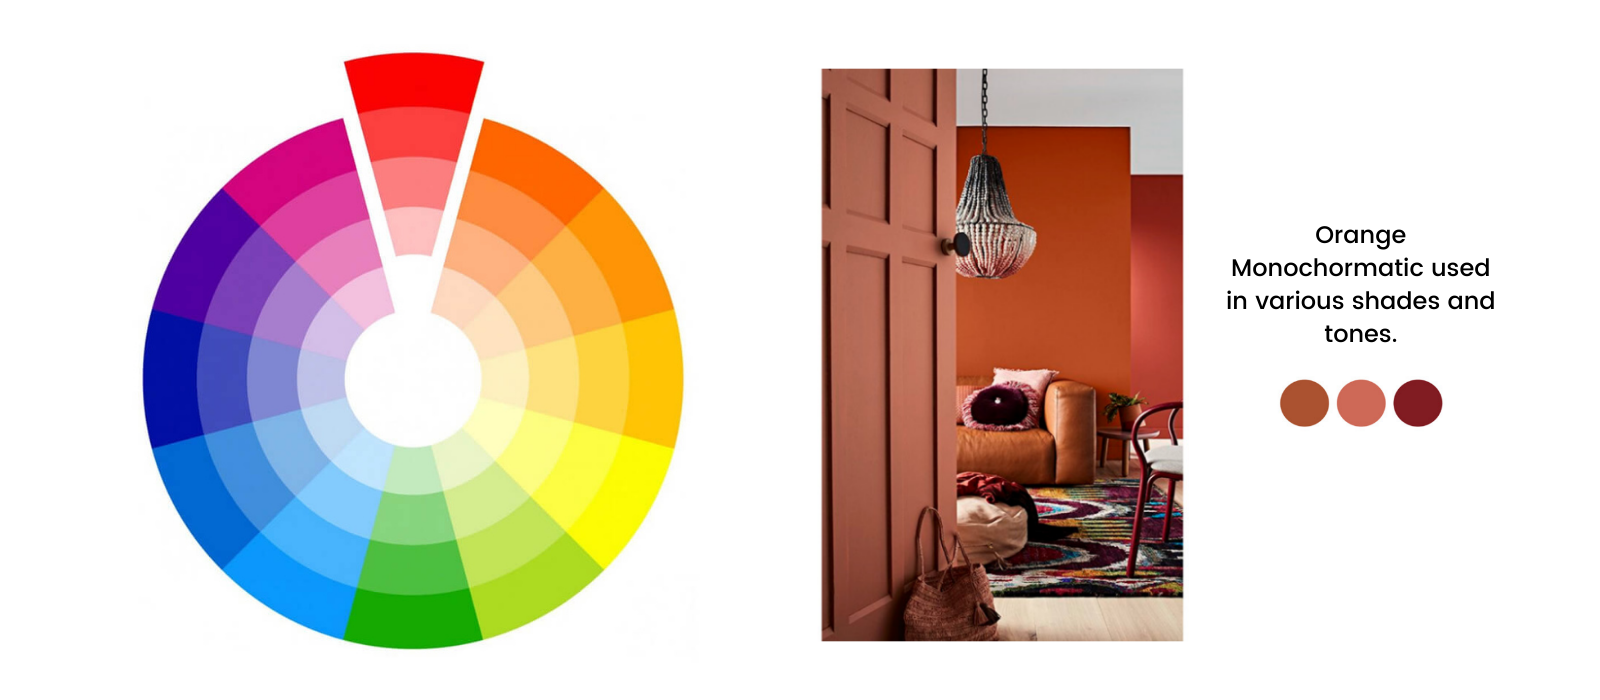 How to decorate your home with a Monochromatic Colour Scheme / Palette.